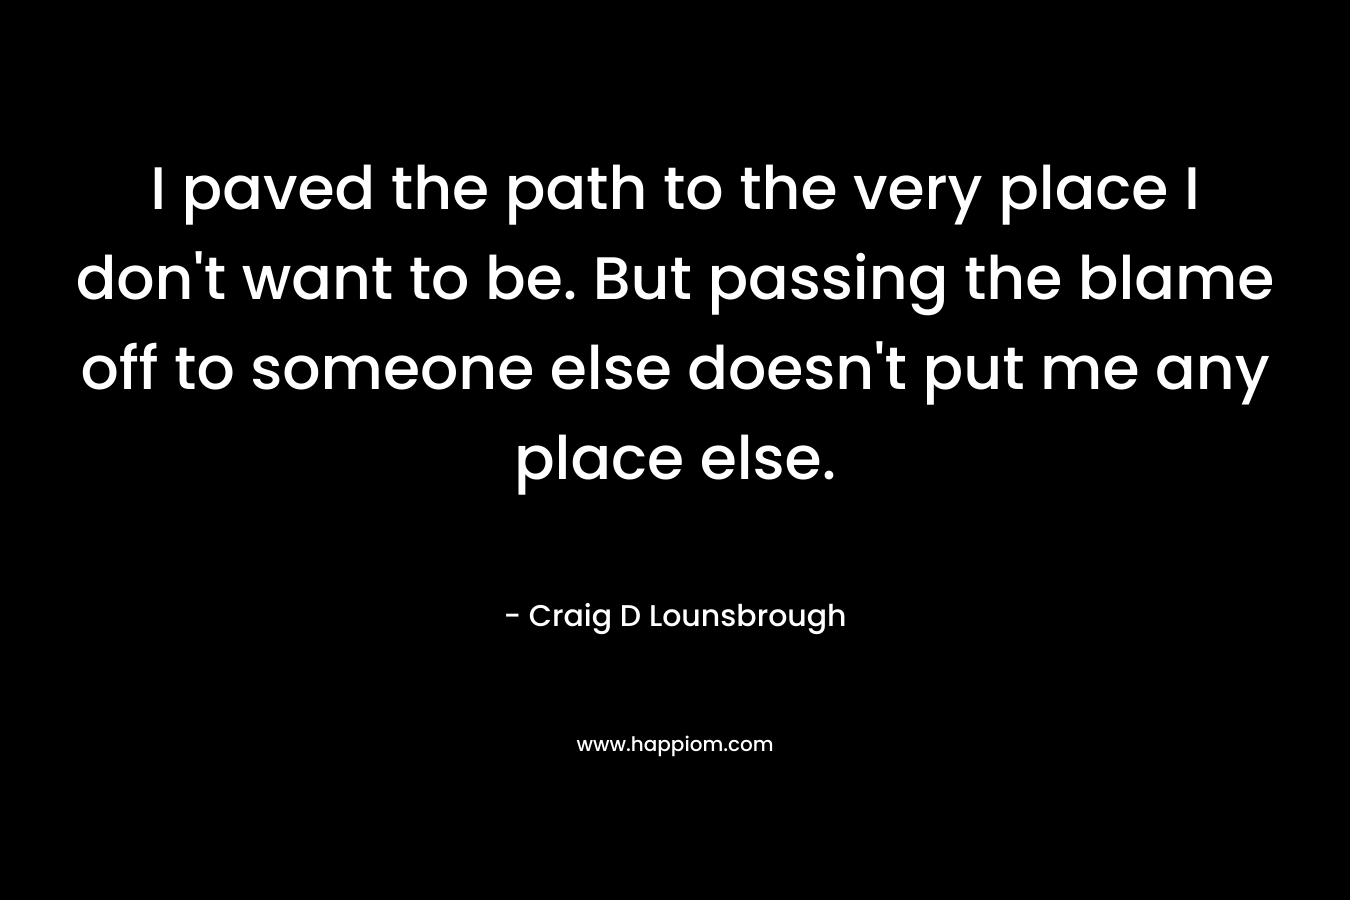 I paved the path to the very place I don’t want to be. But passing the blame off to someone else doesn’t put me any place else. – Craig D Lounsbrough